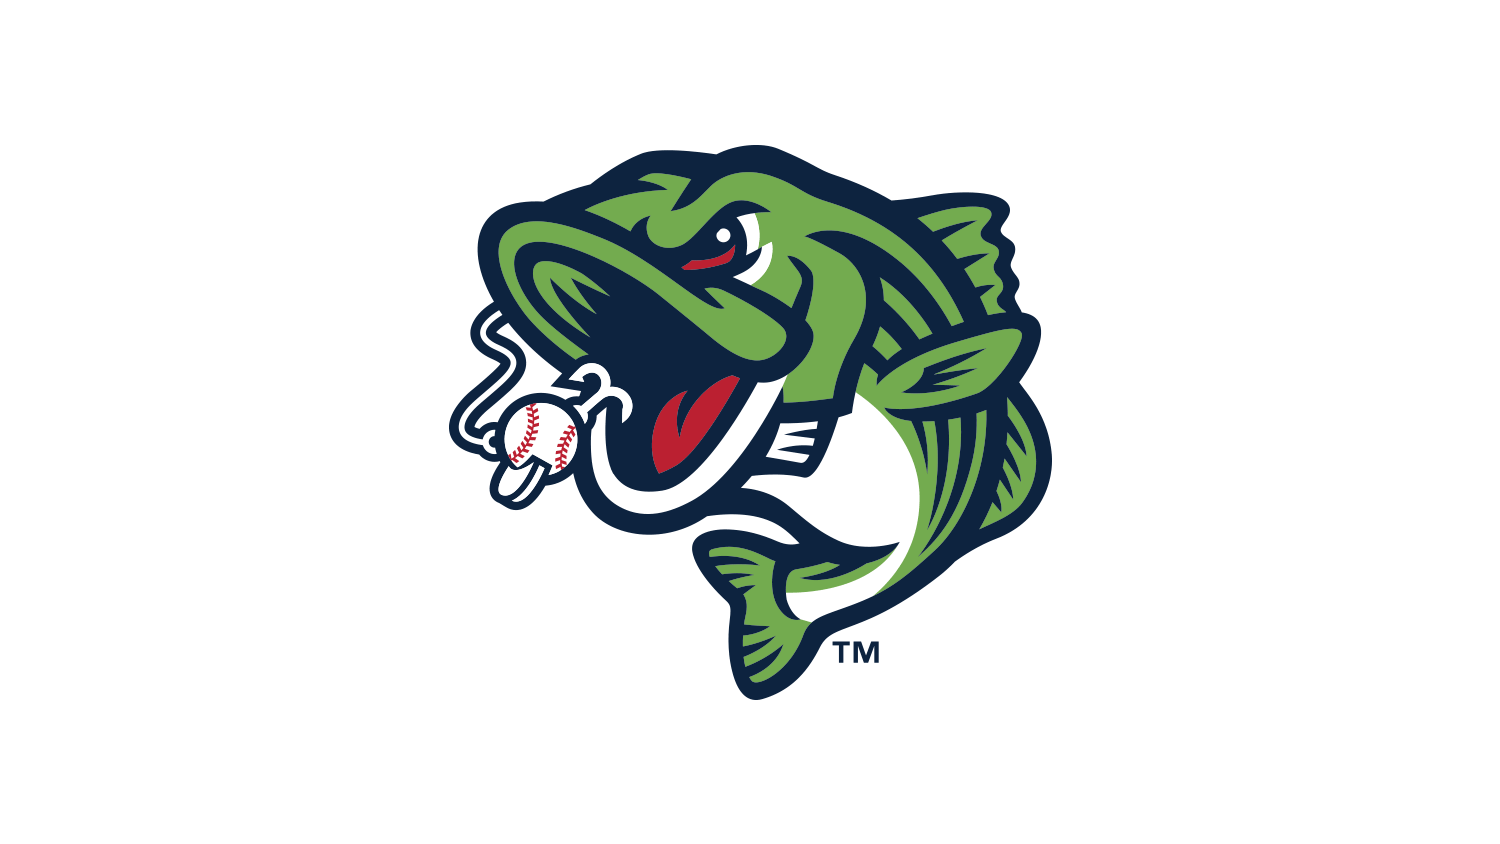 The Stripers take a datadriven approach to putting fans first